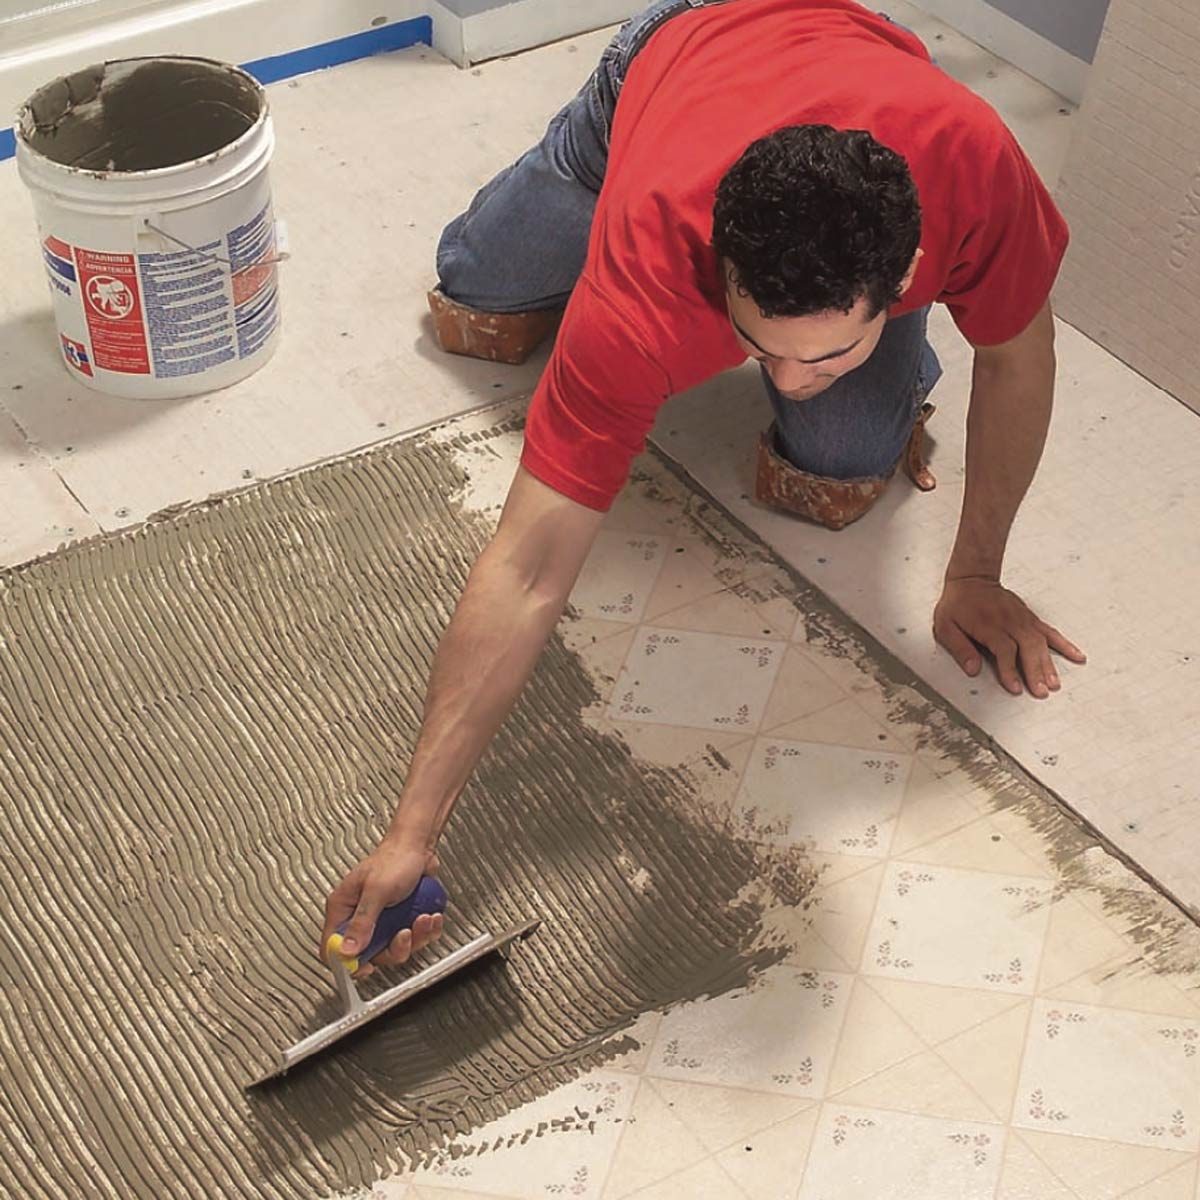 How To Lay Tile Install A Ceramic Tile Floor In The Bathroom